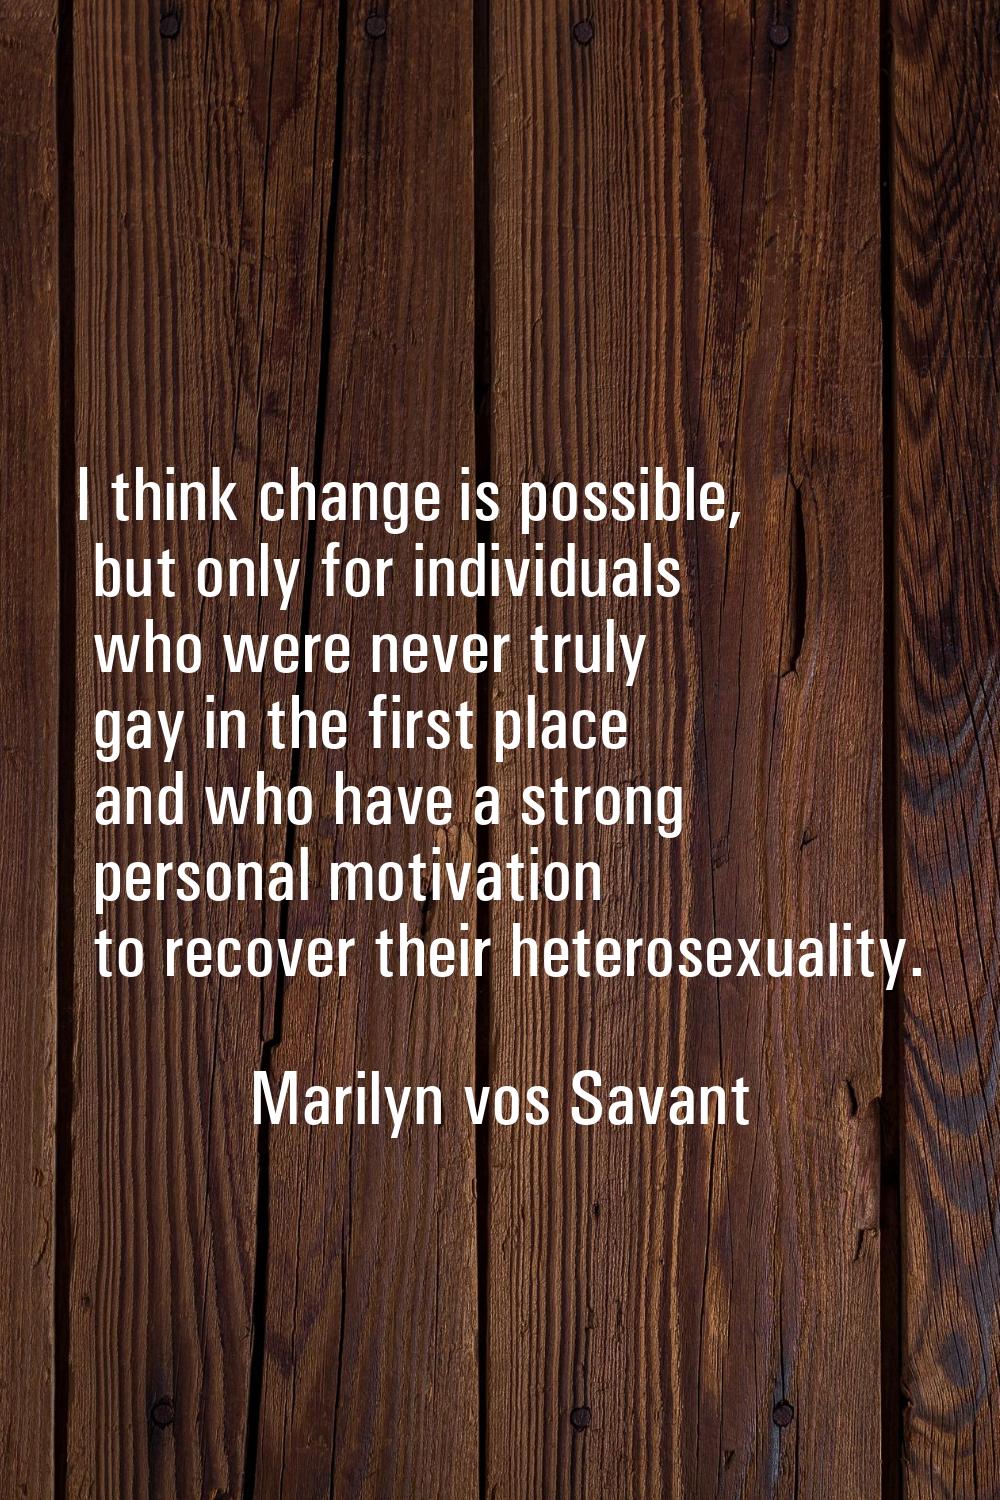 I think change is possible, but only for individuals who were never truly gay in the first place an